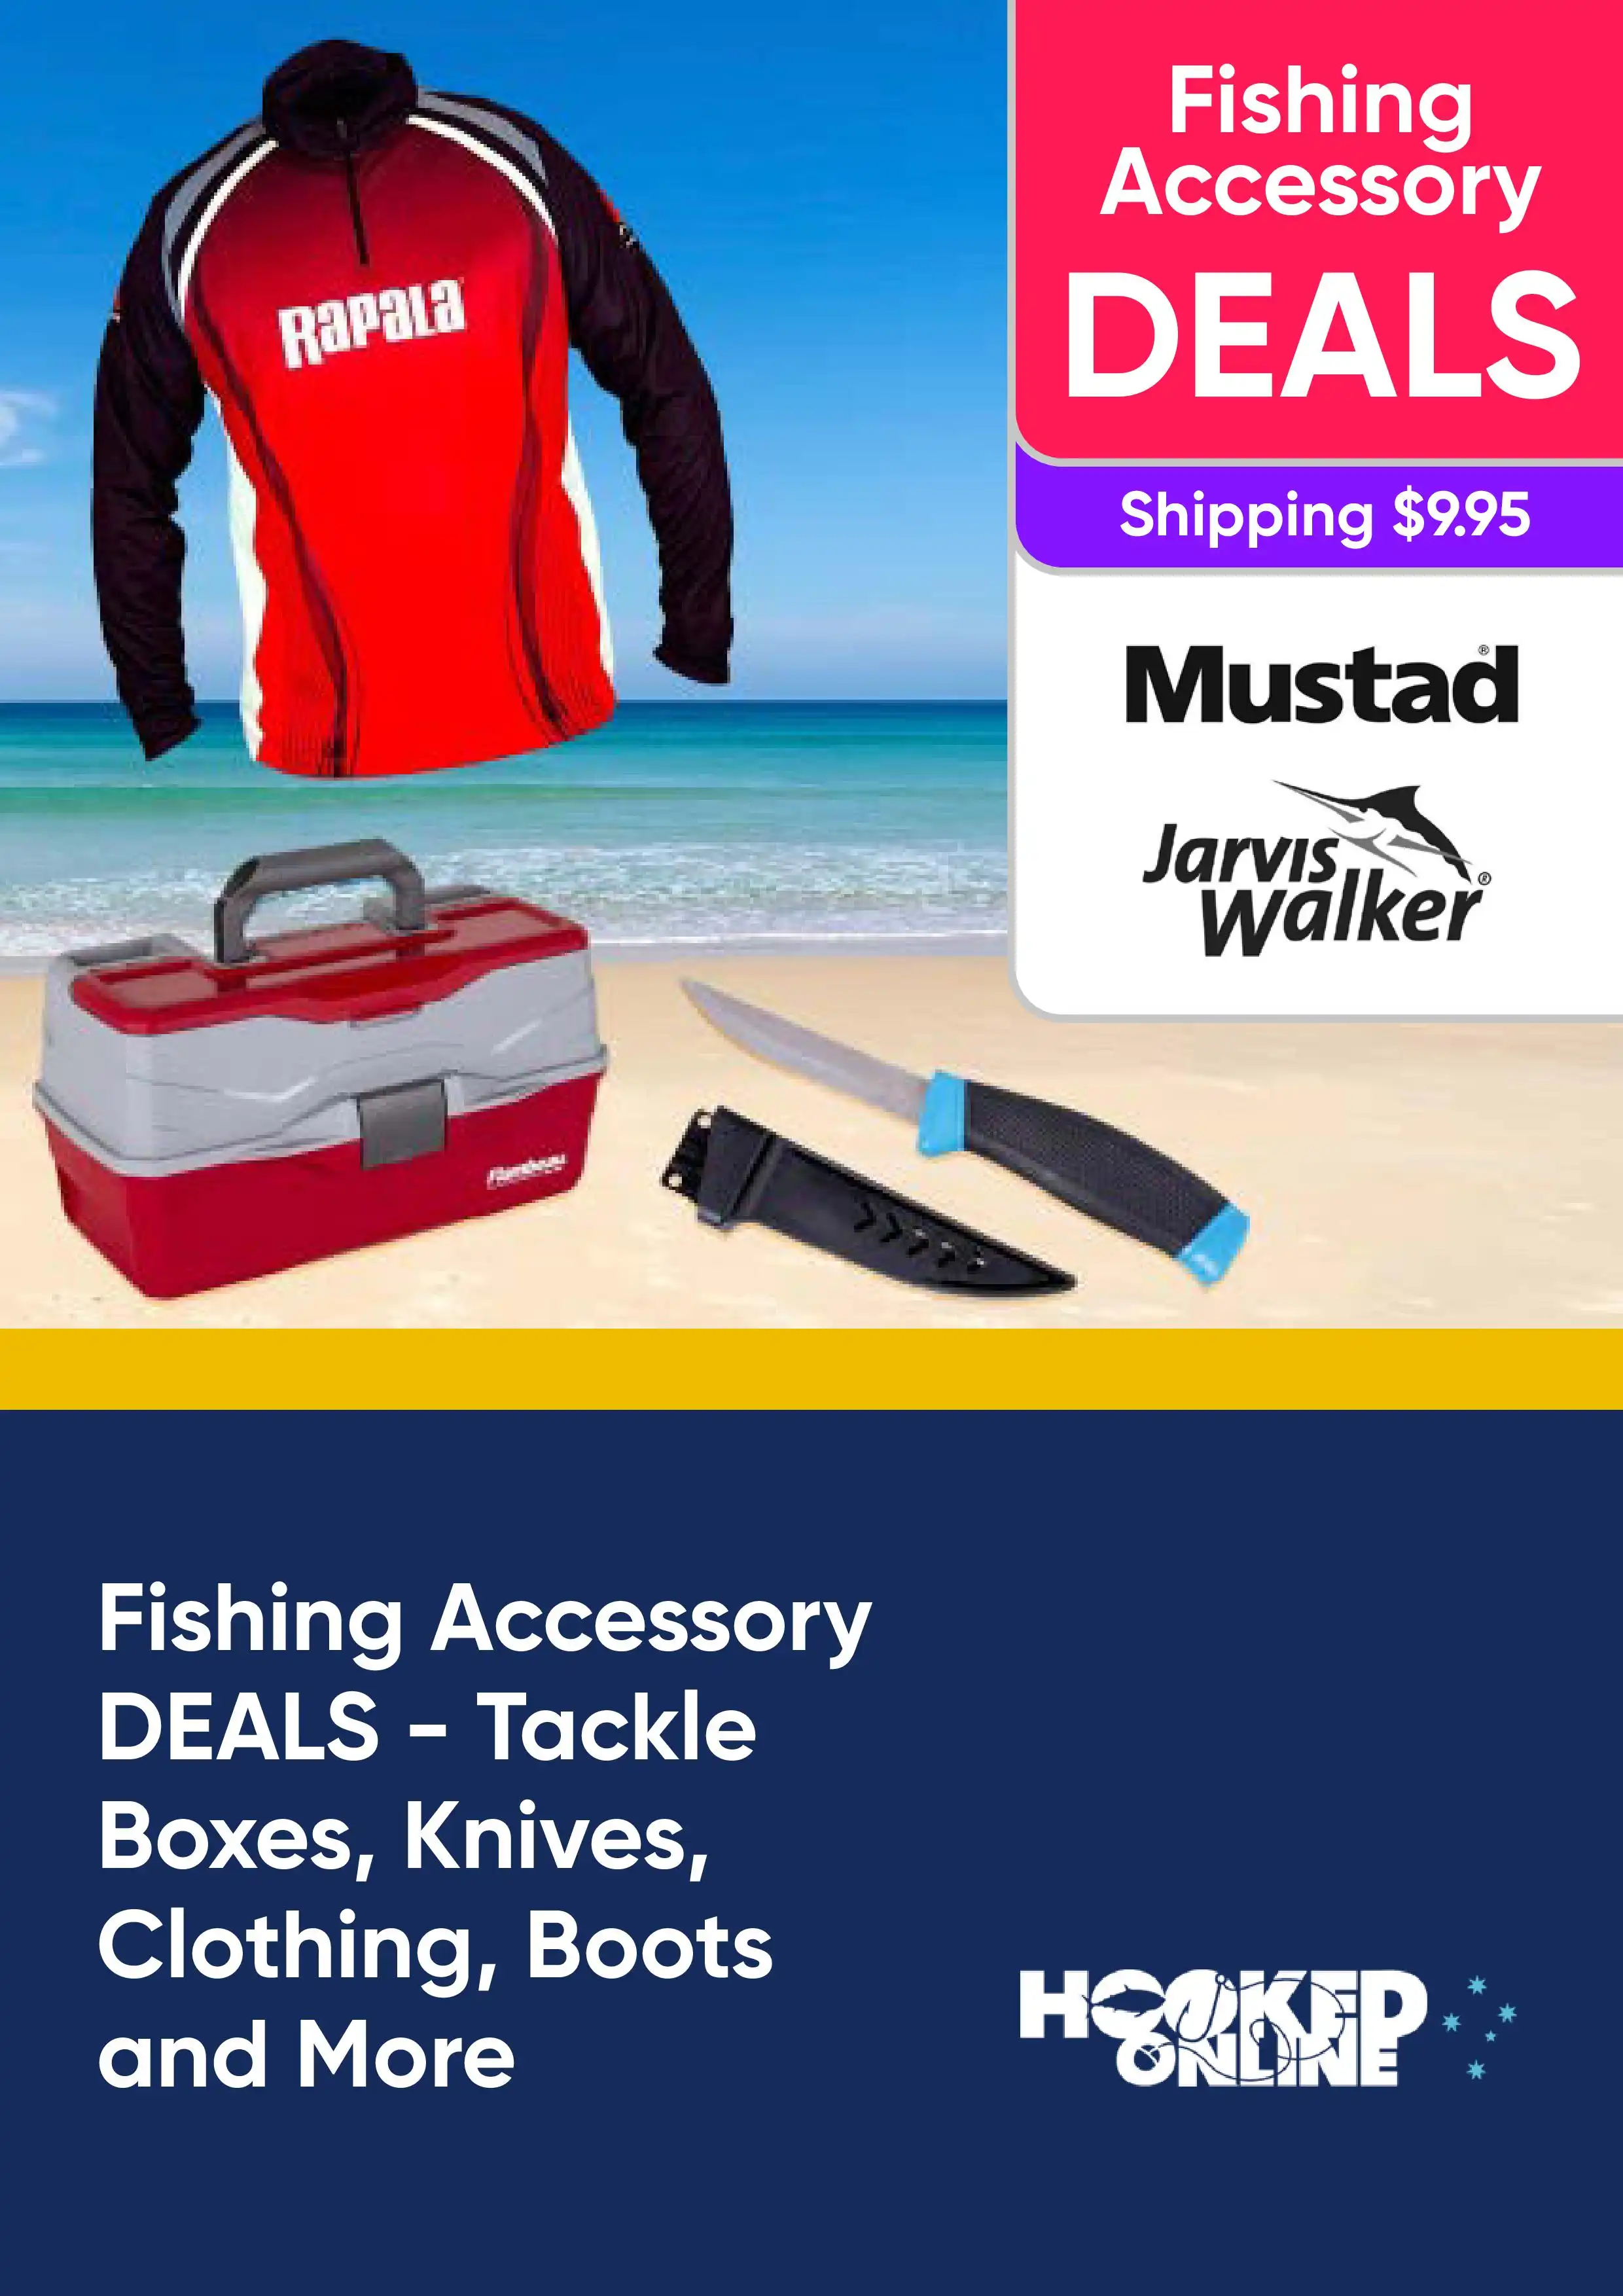 Fishing Accessory Deals - Tackle Boxes, Knives, Clothing, Boots and More